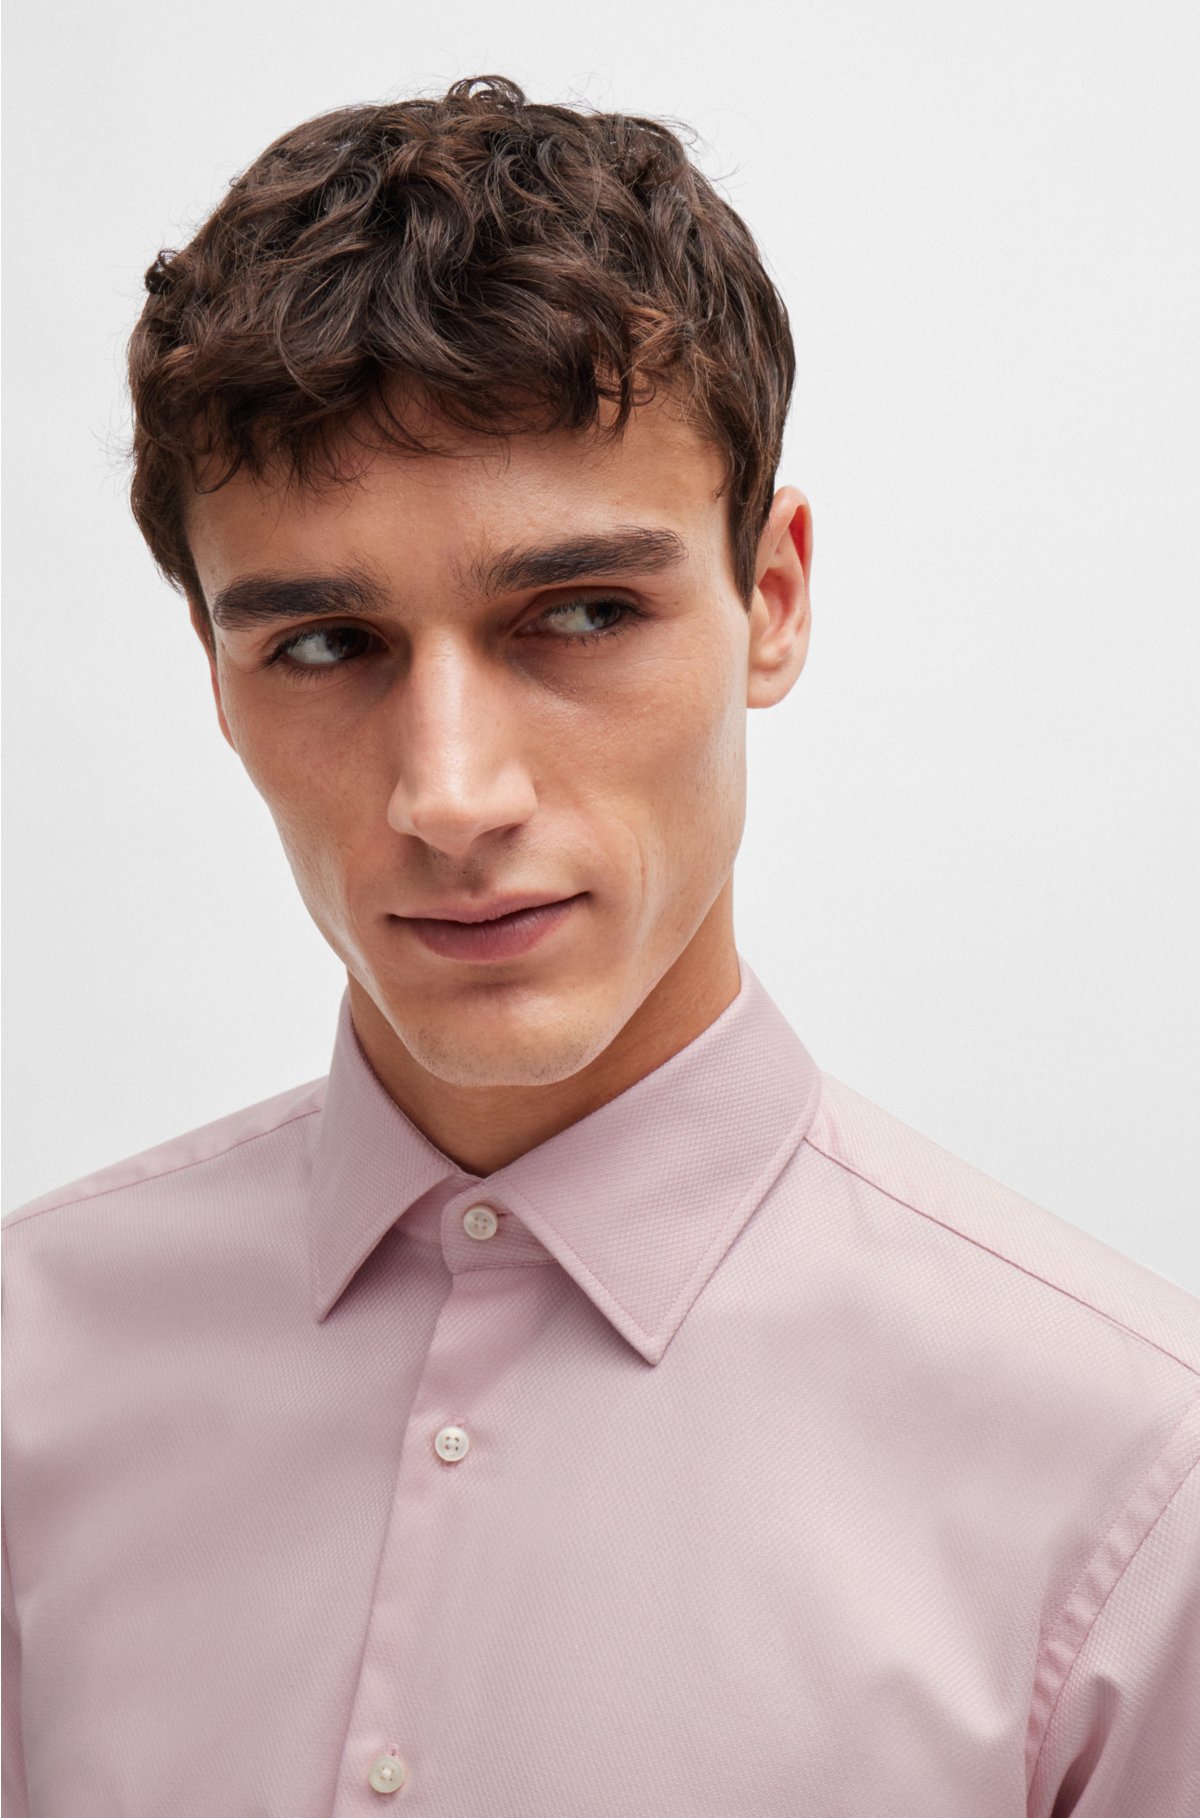 Regular-fit shirt in easy-iron structured stretch cotton, light pink